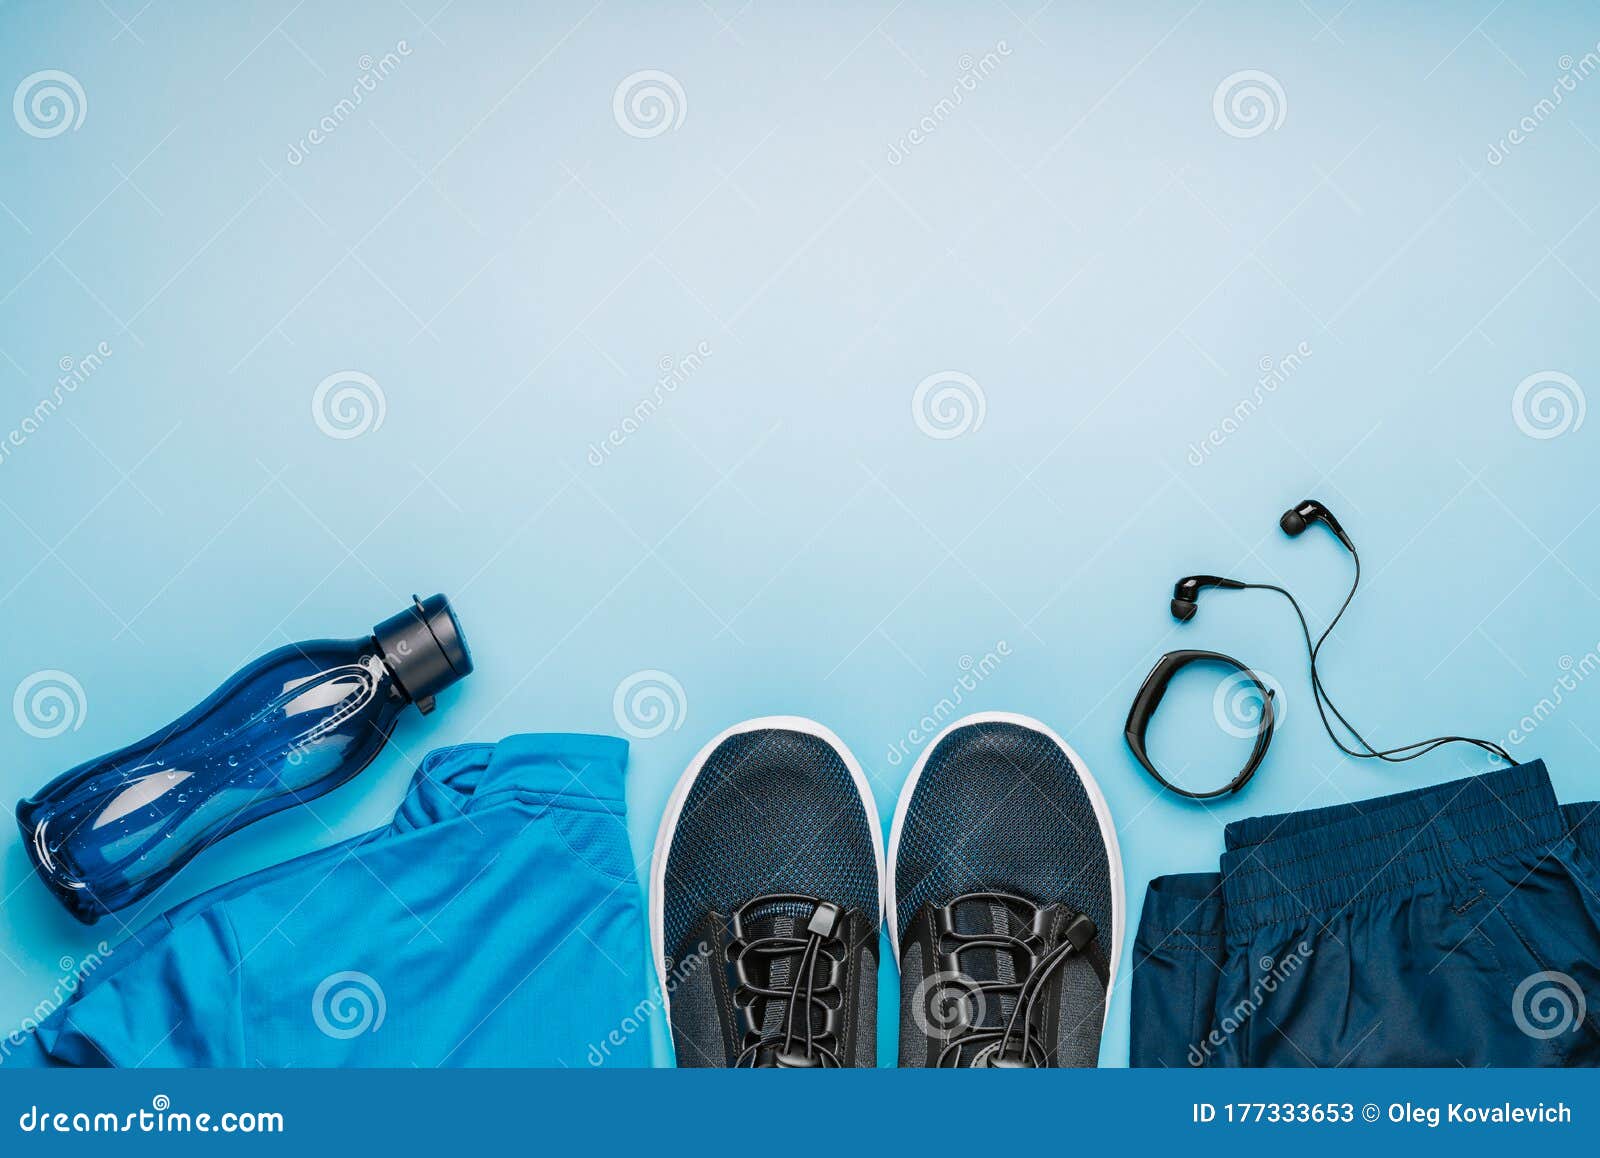 Sports Clothing and Accessories for Running on a Blue Background, the ...